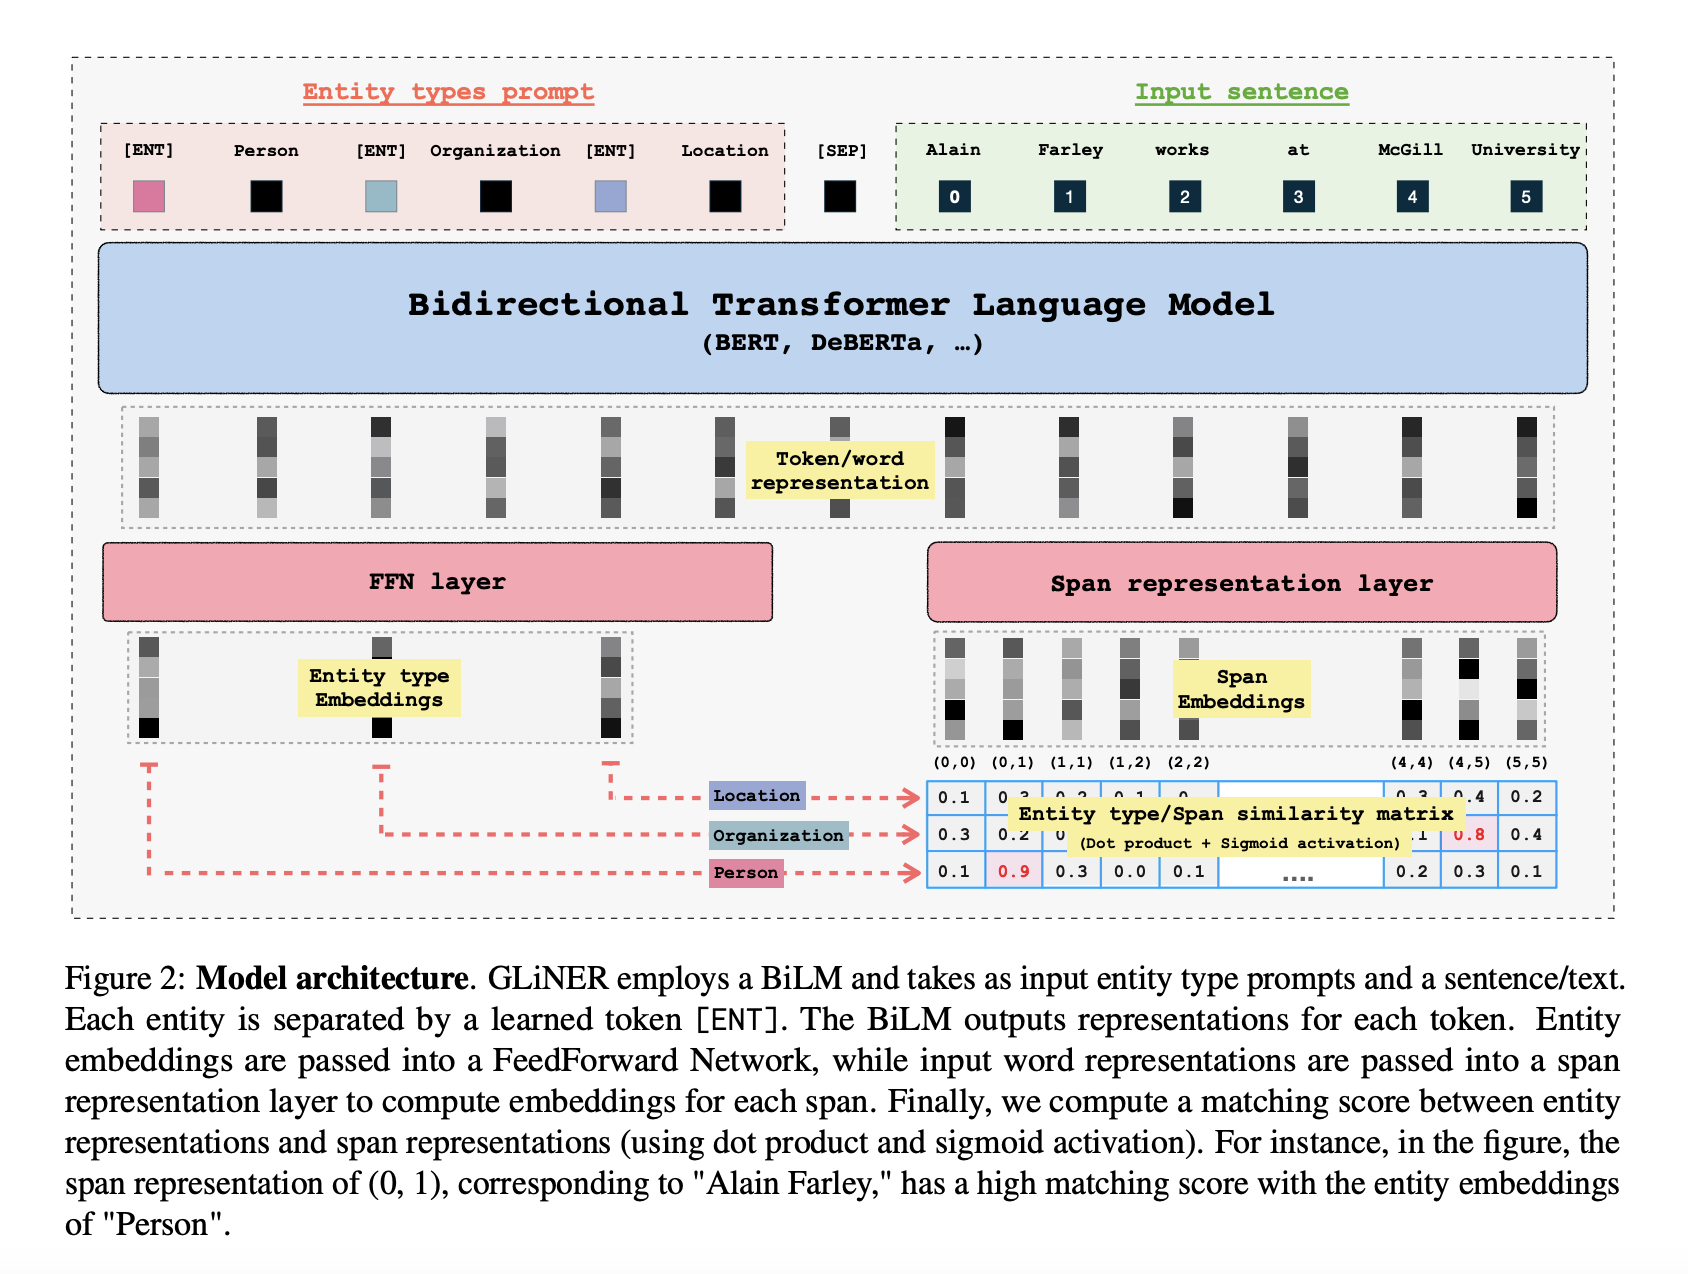  Meet GLiNER: A Generalist AI Model for Named Entity Recognition (NER) Using a Bidirectional Transformer